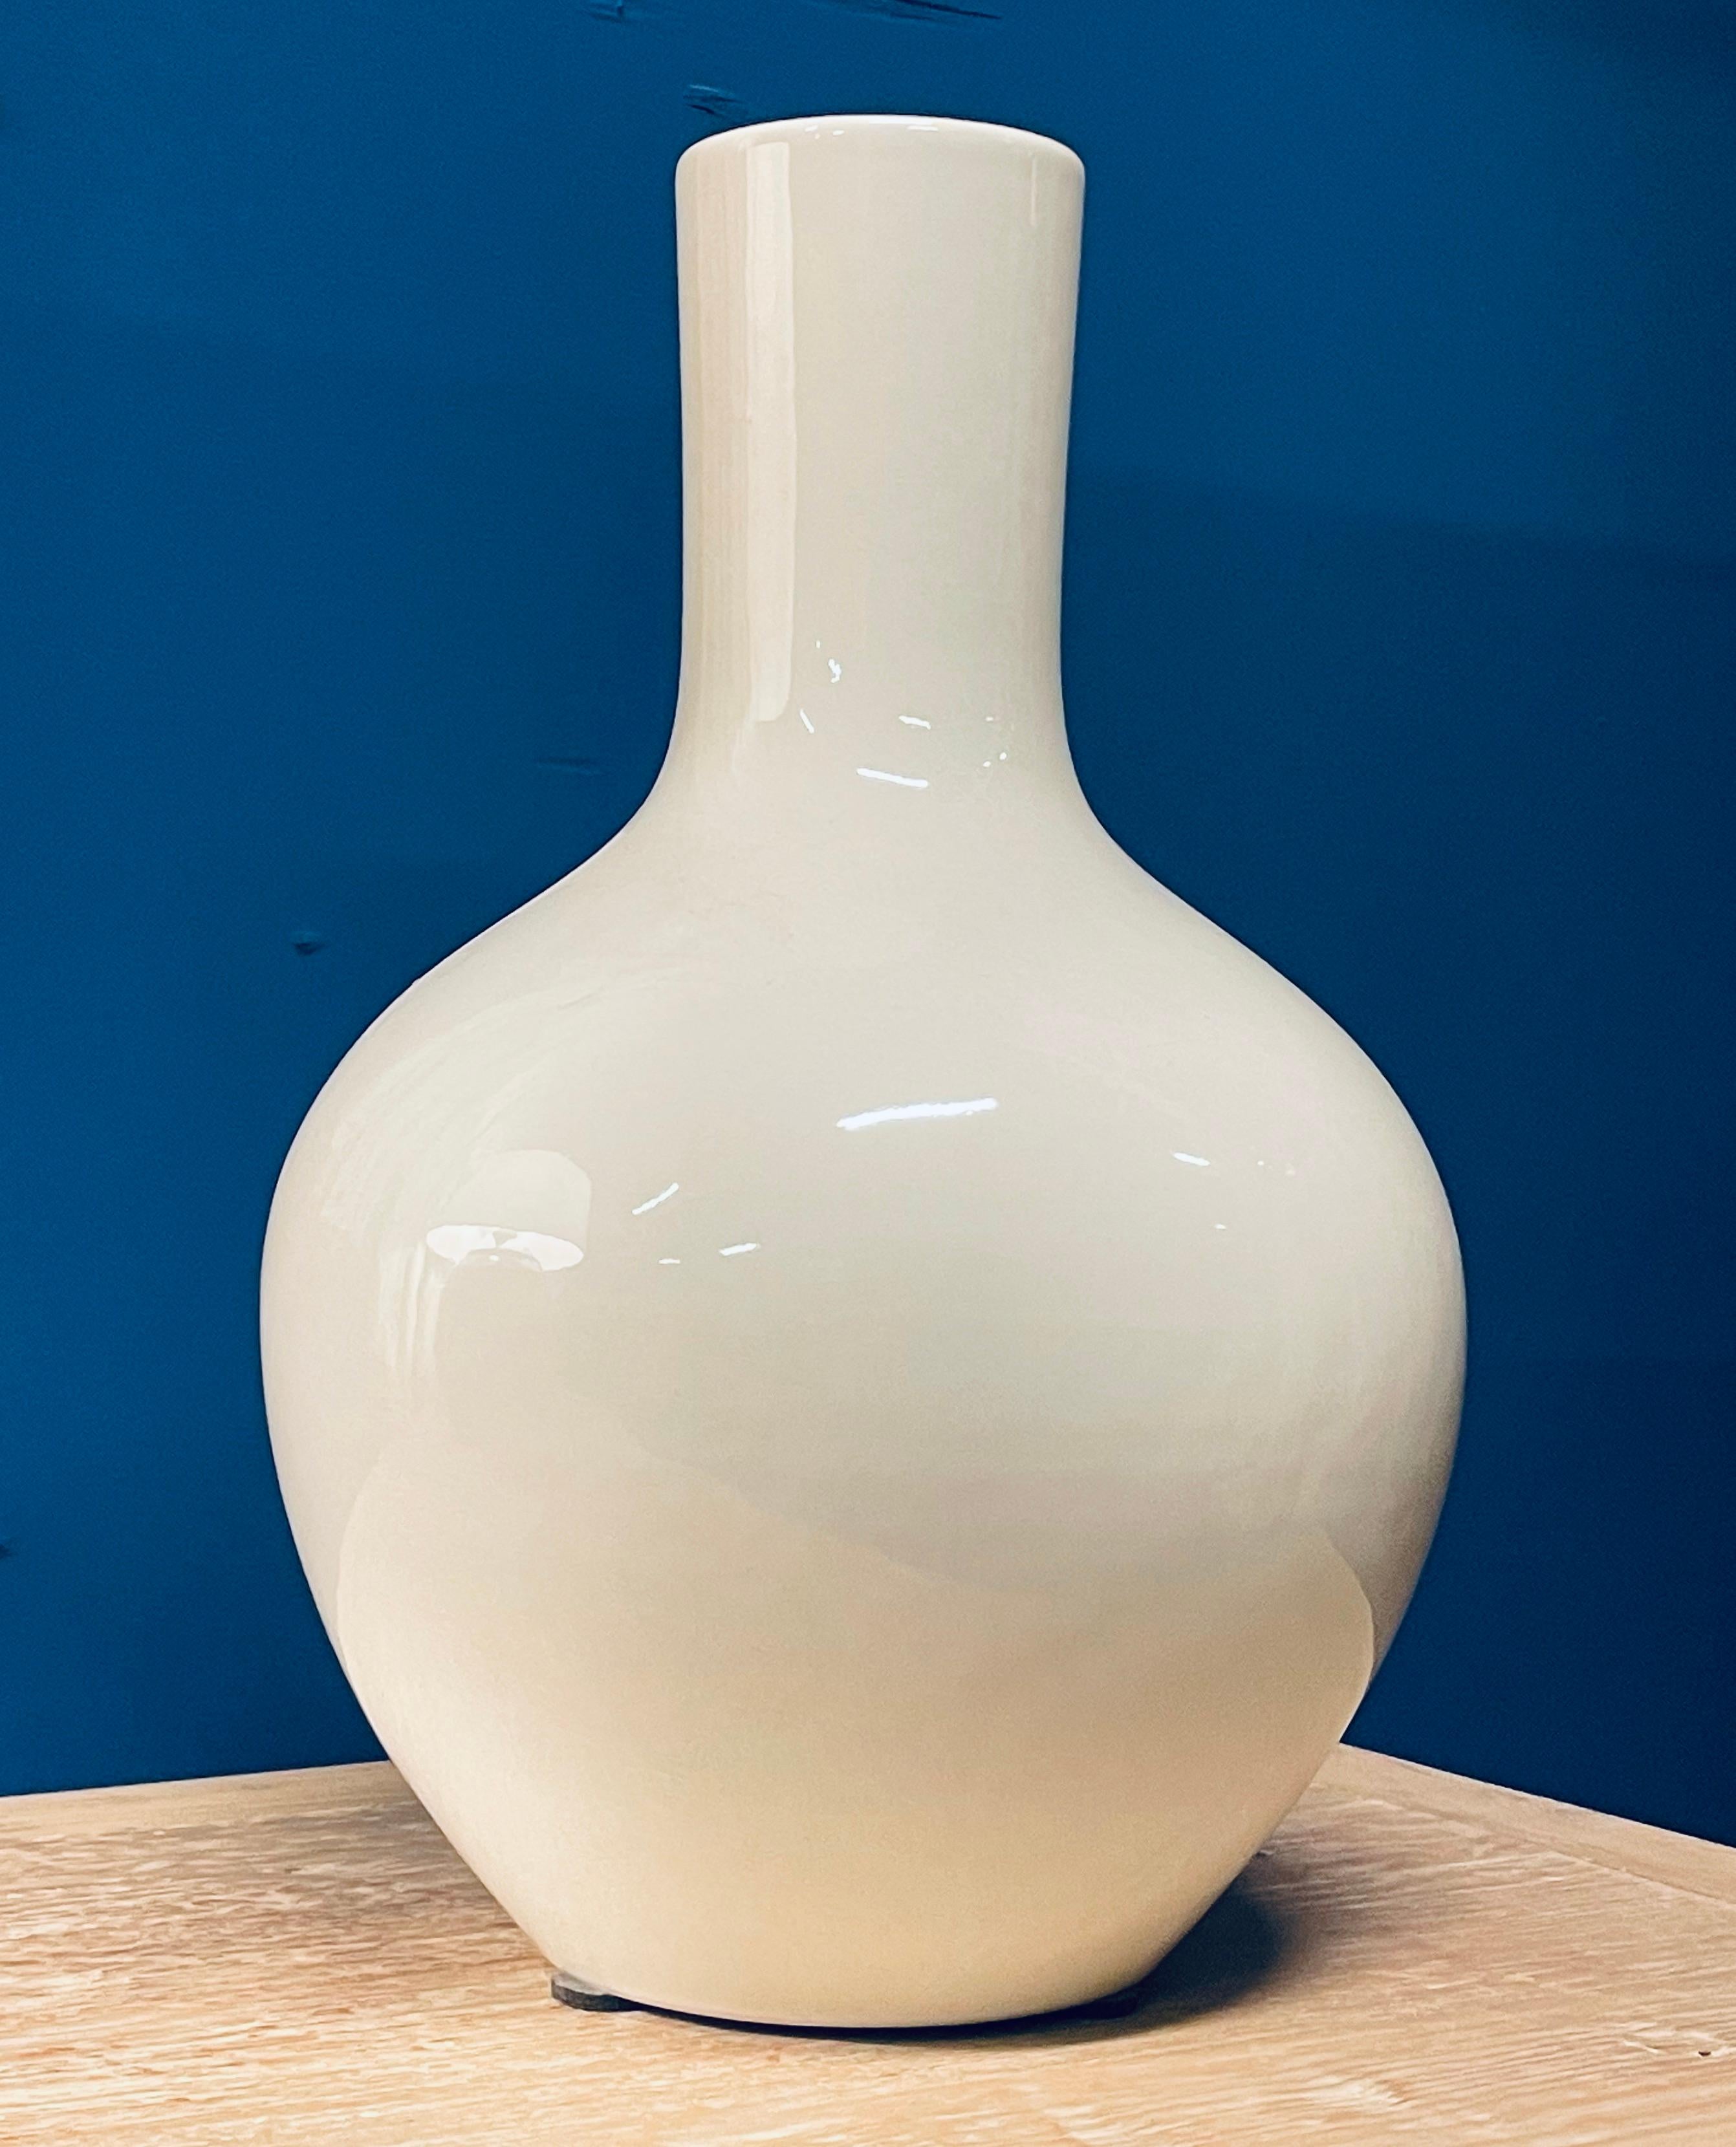 Contemporary Chinese white ceramic vase with elongated tube neck design.
From a large collection.
